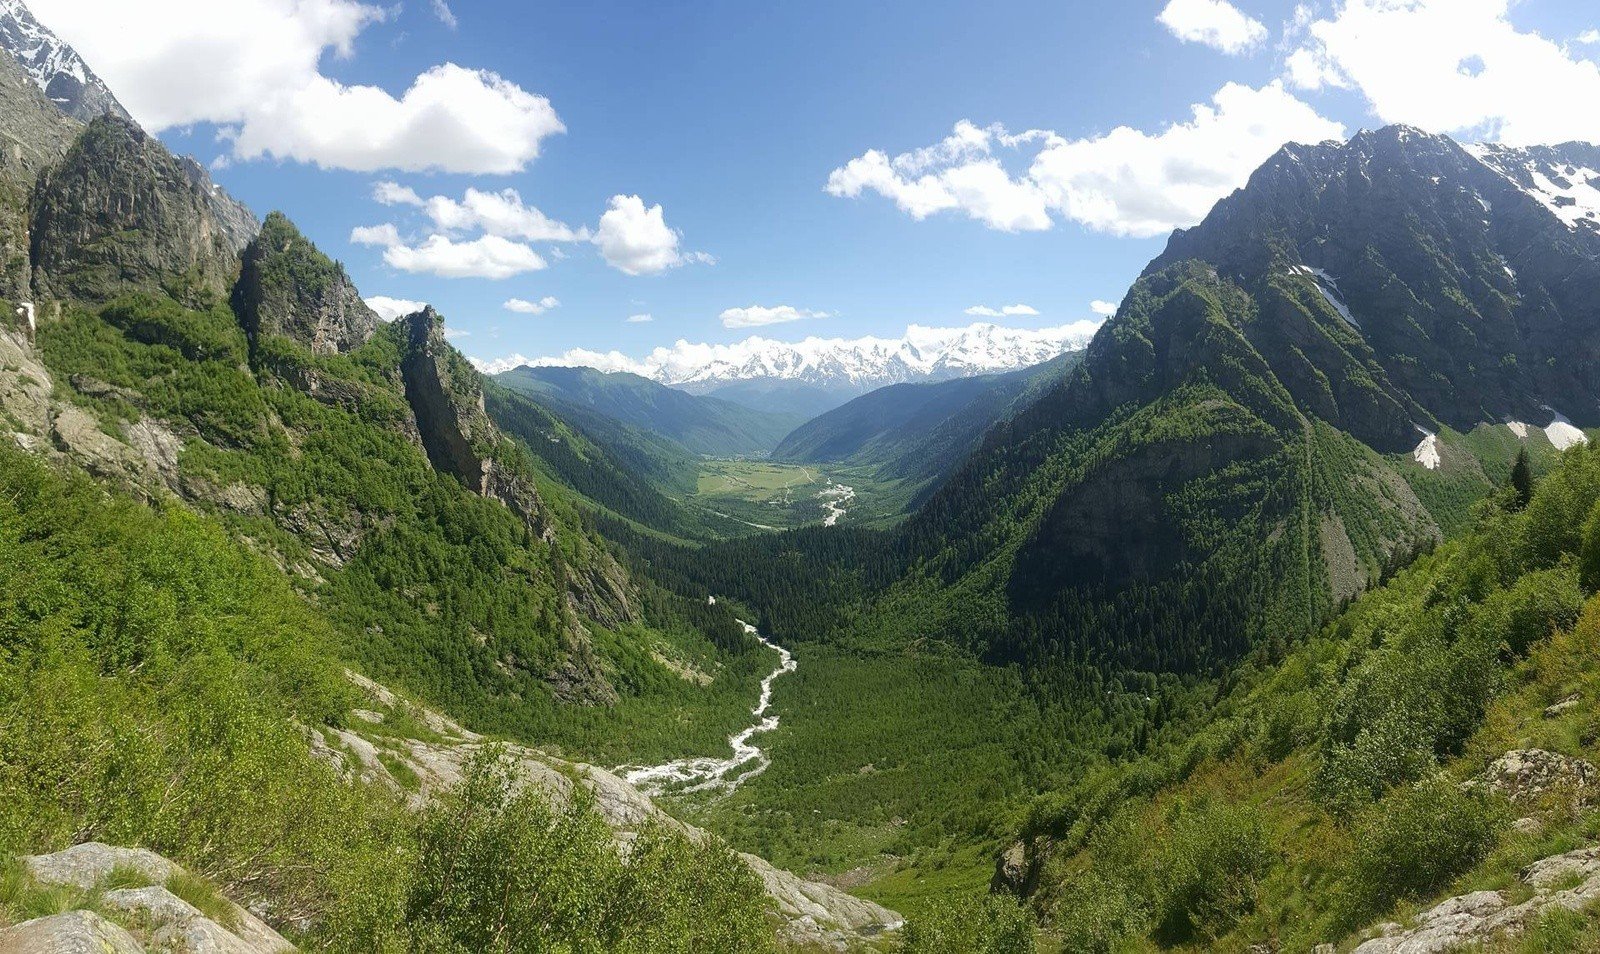 A green valley in the Caucasus Mountains